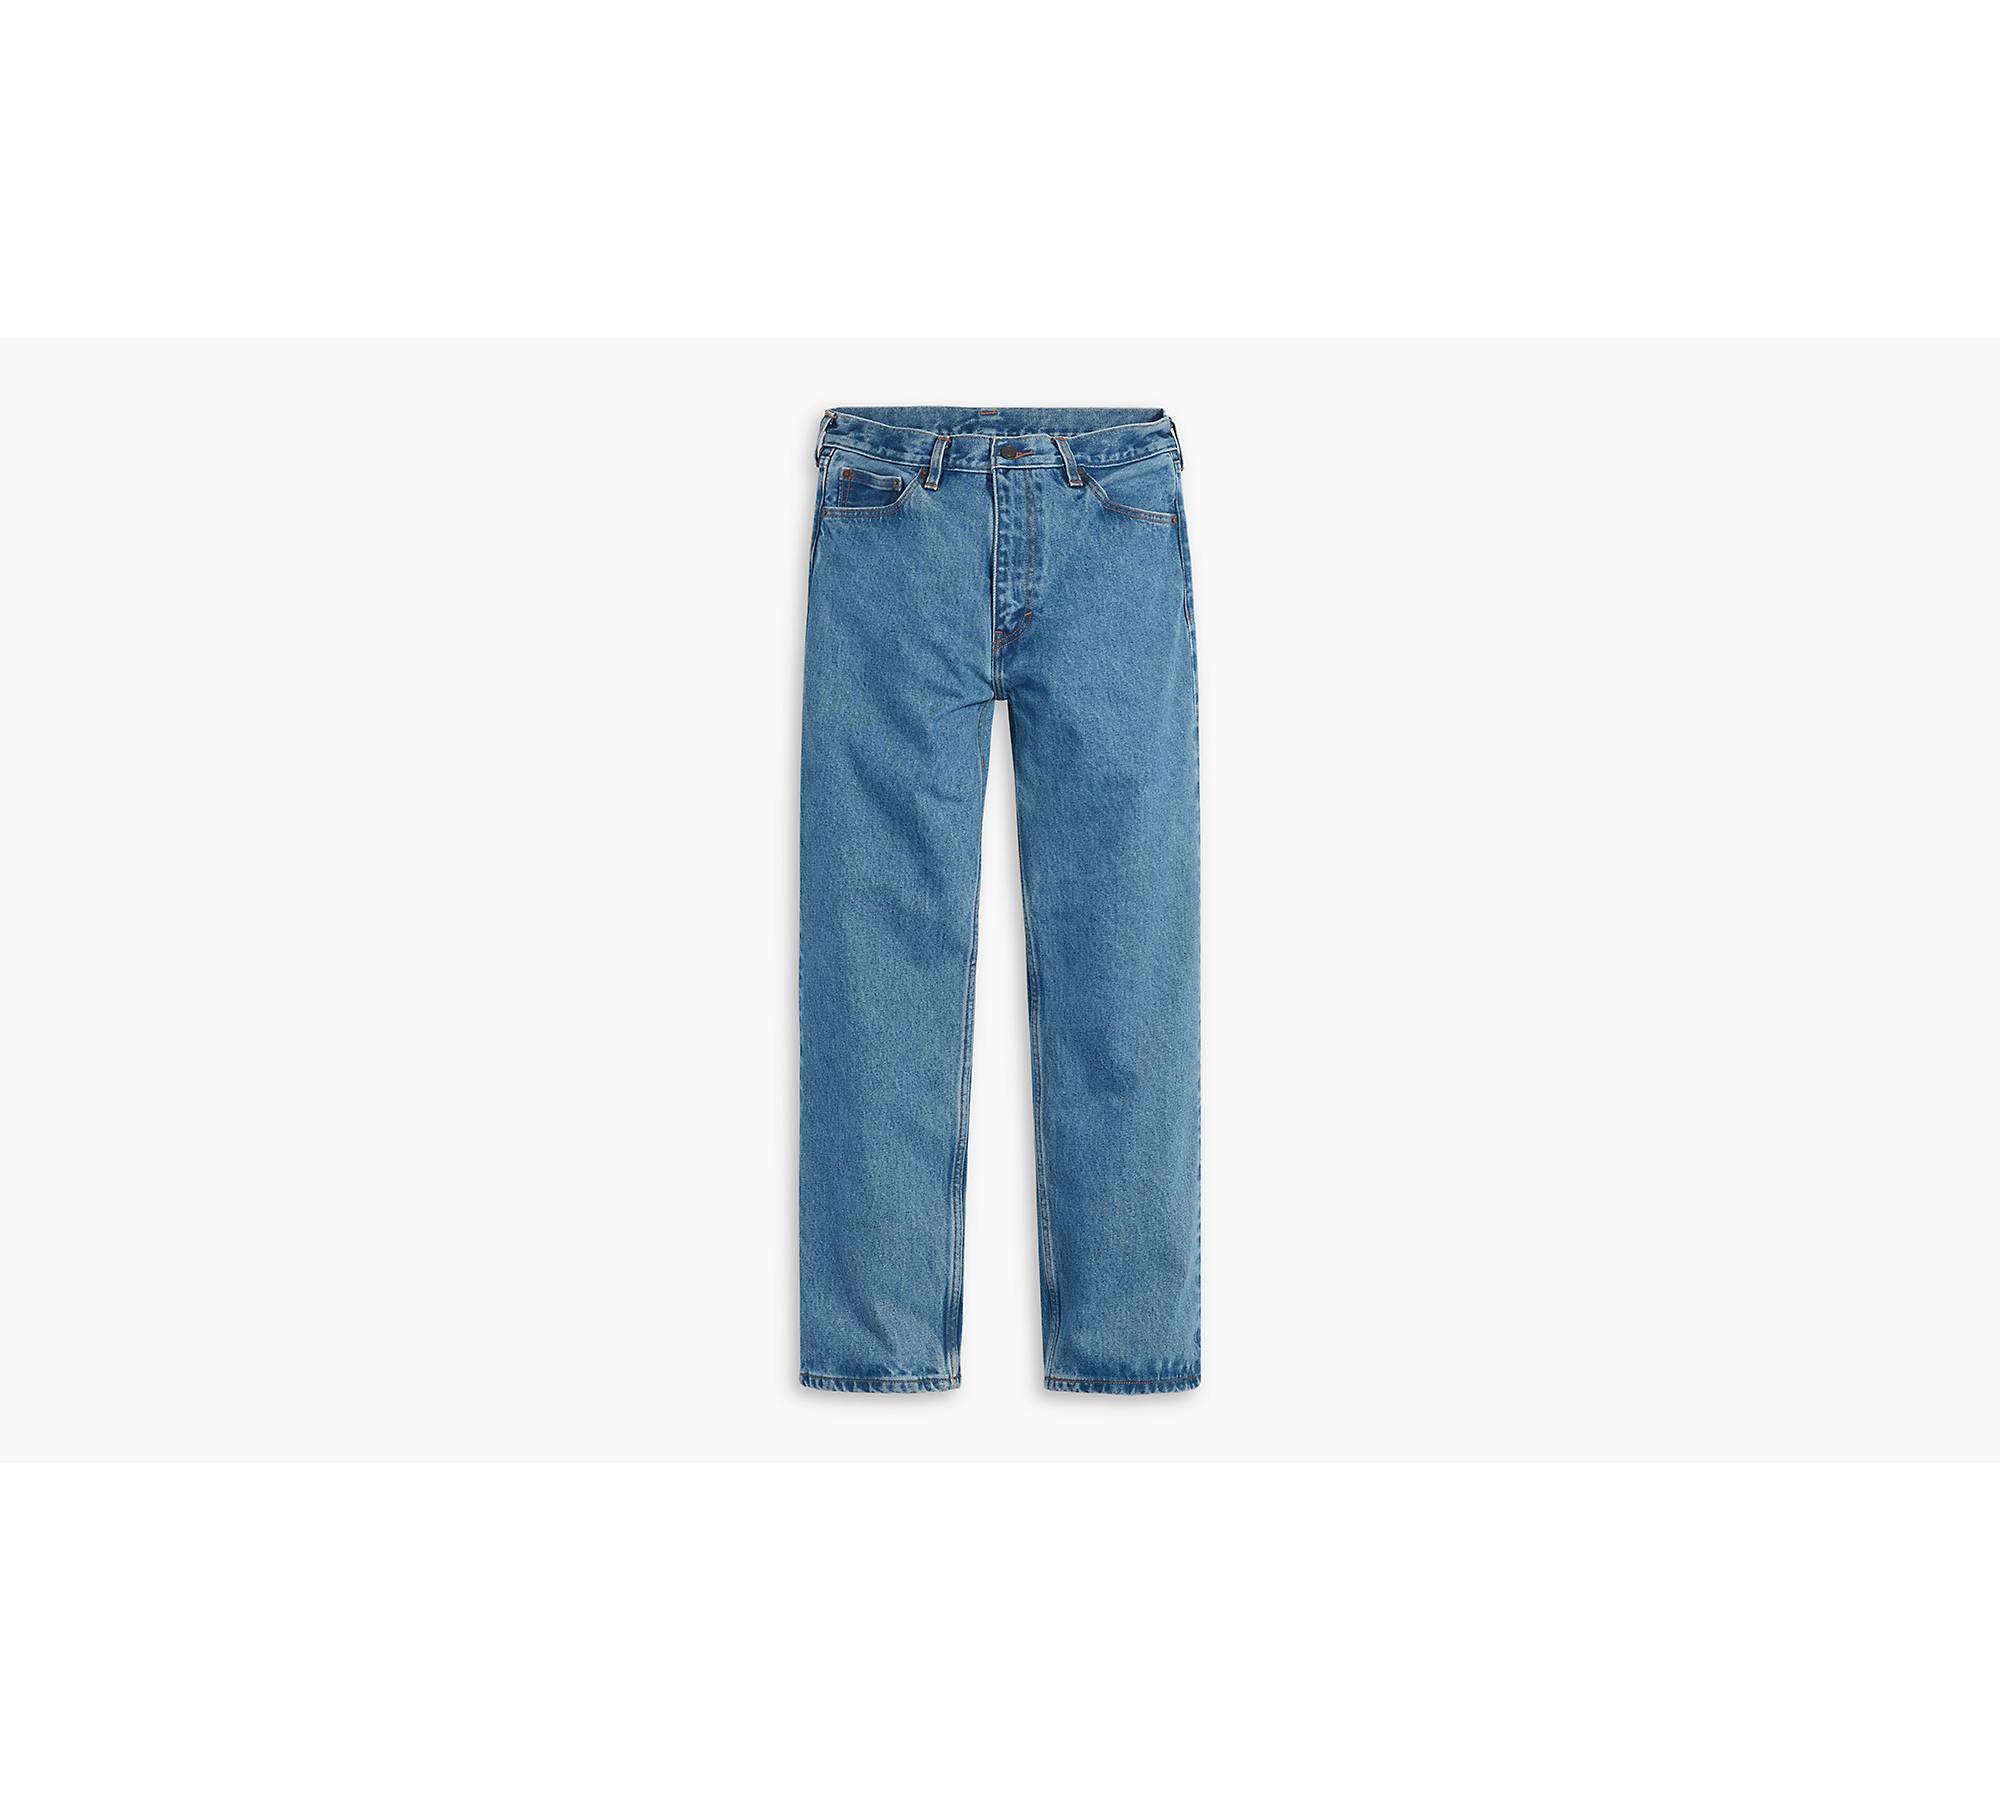 I Thought Denim Culottes Were Impossible to Pull Off, But These